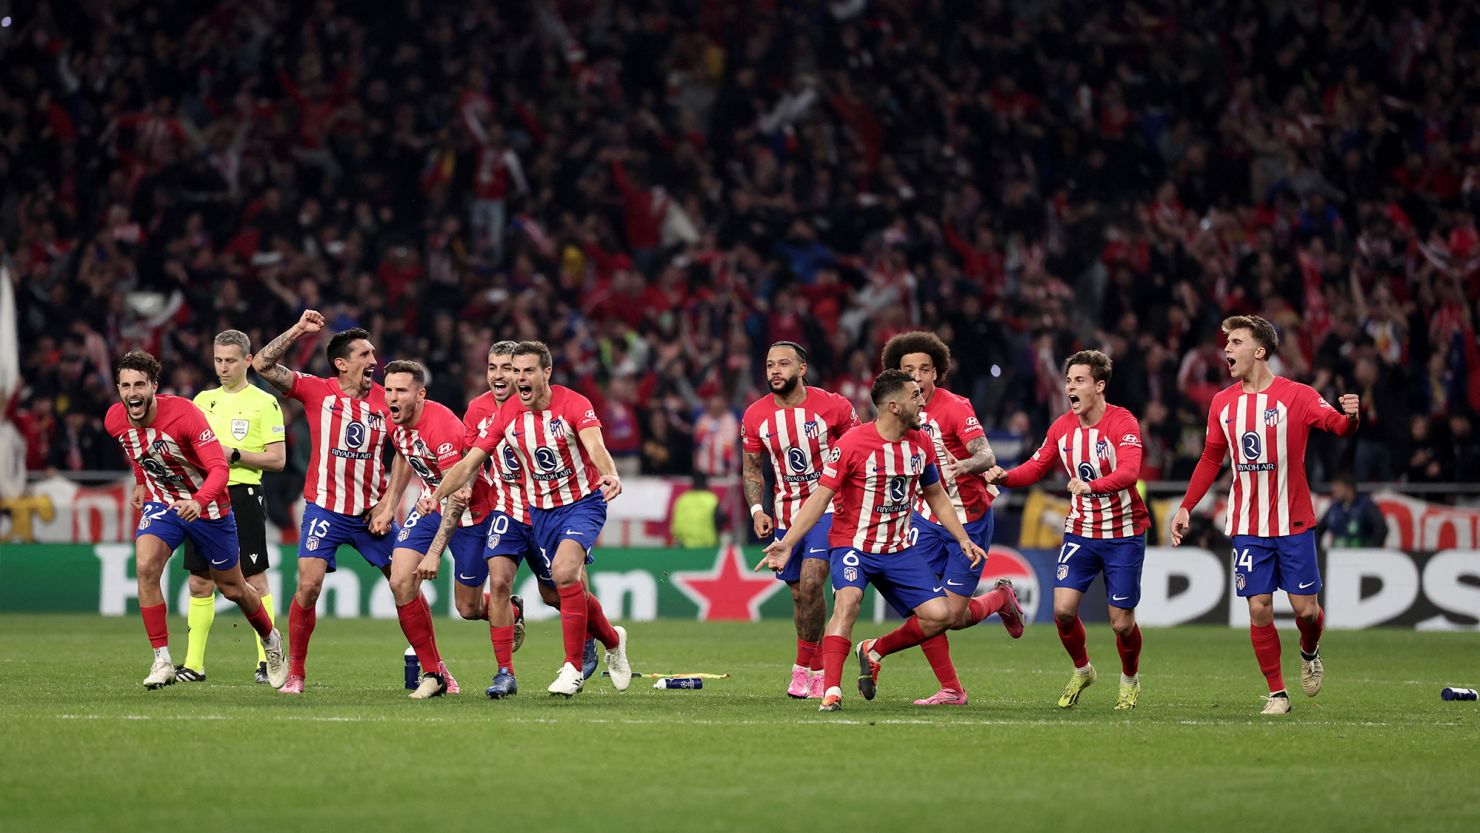 Atlético Madrid secured a comeback victory against Inter Milan in the Champions League last 16.